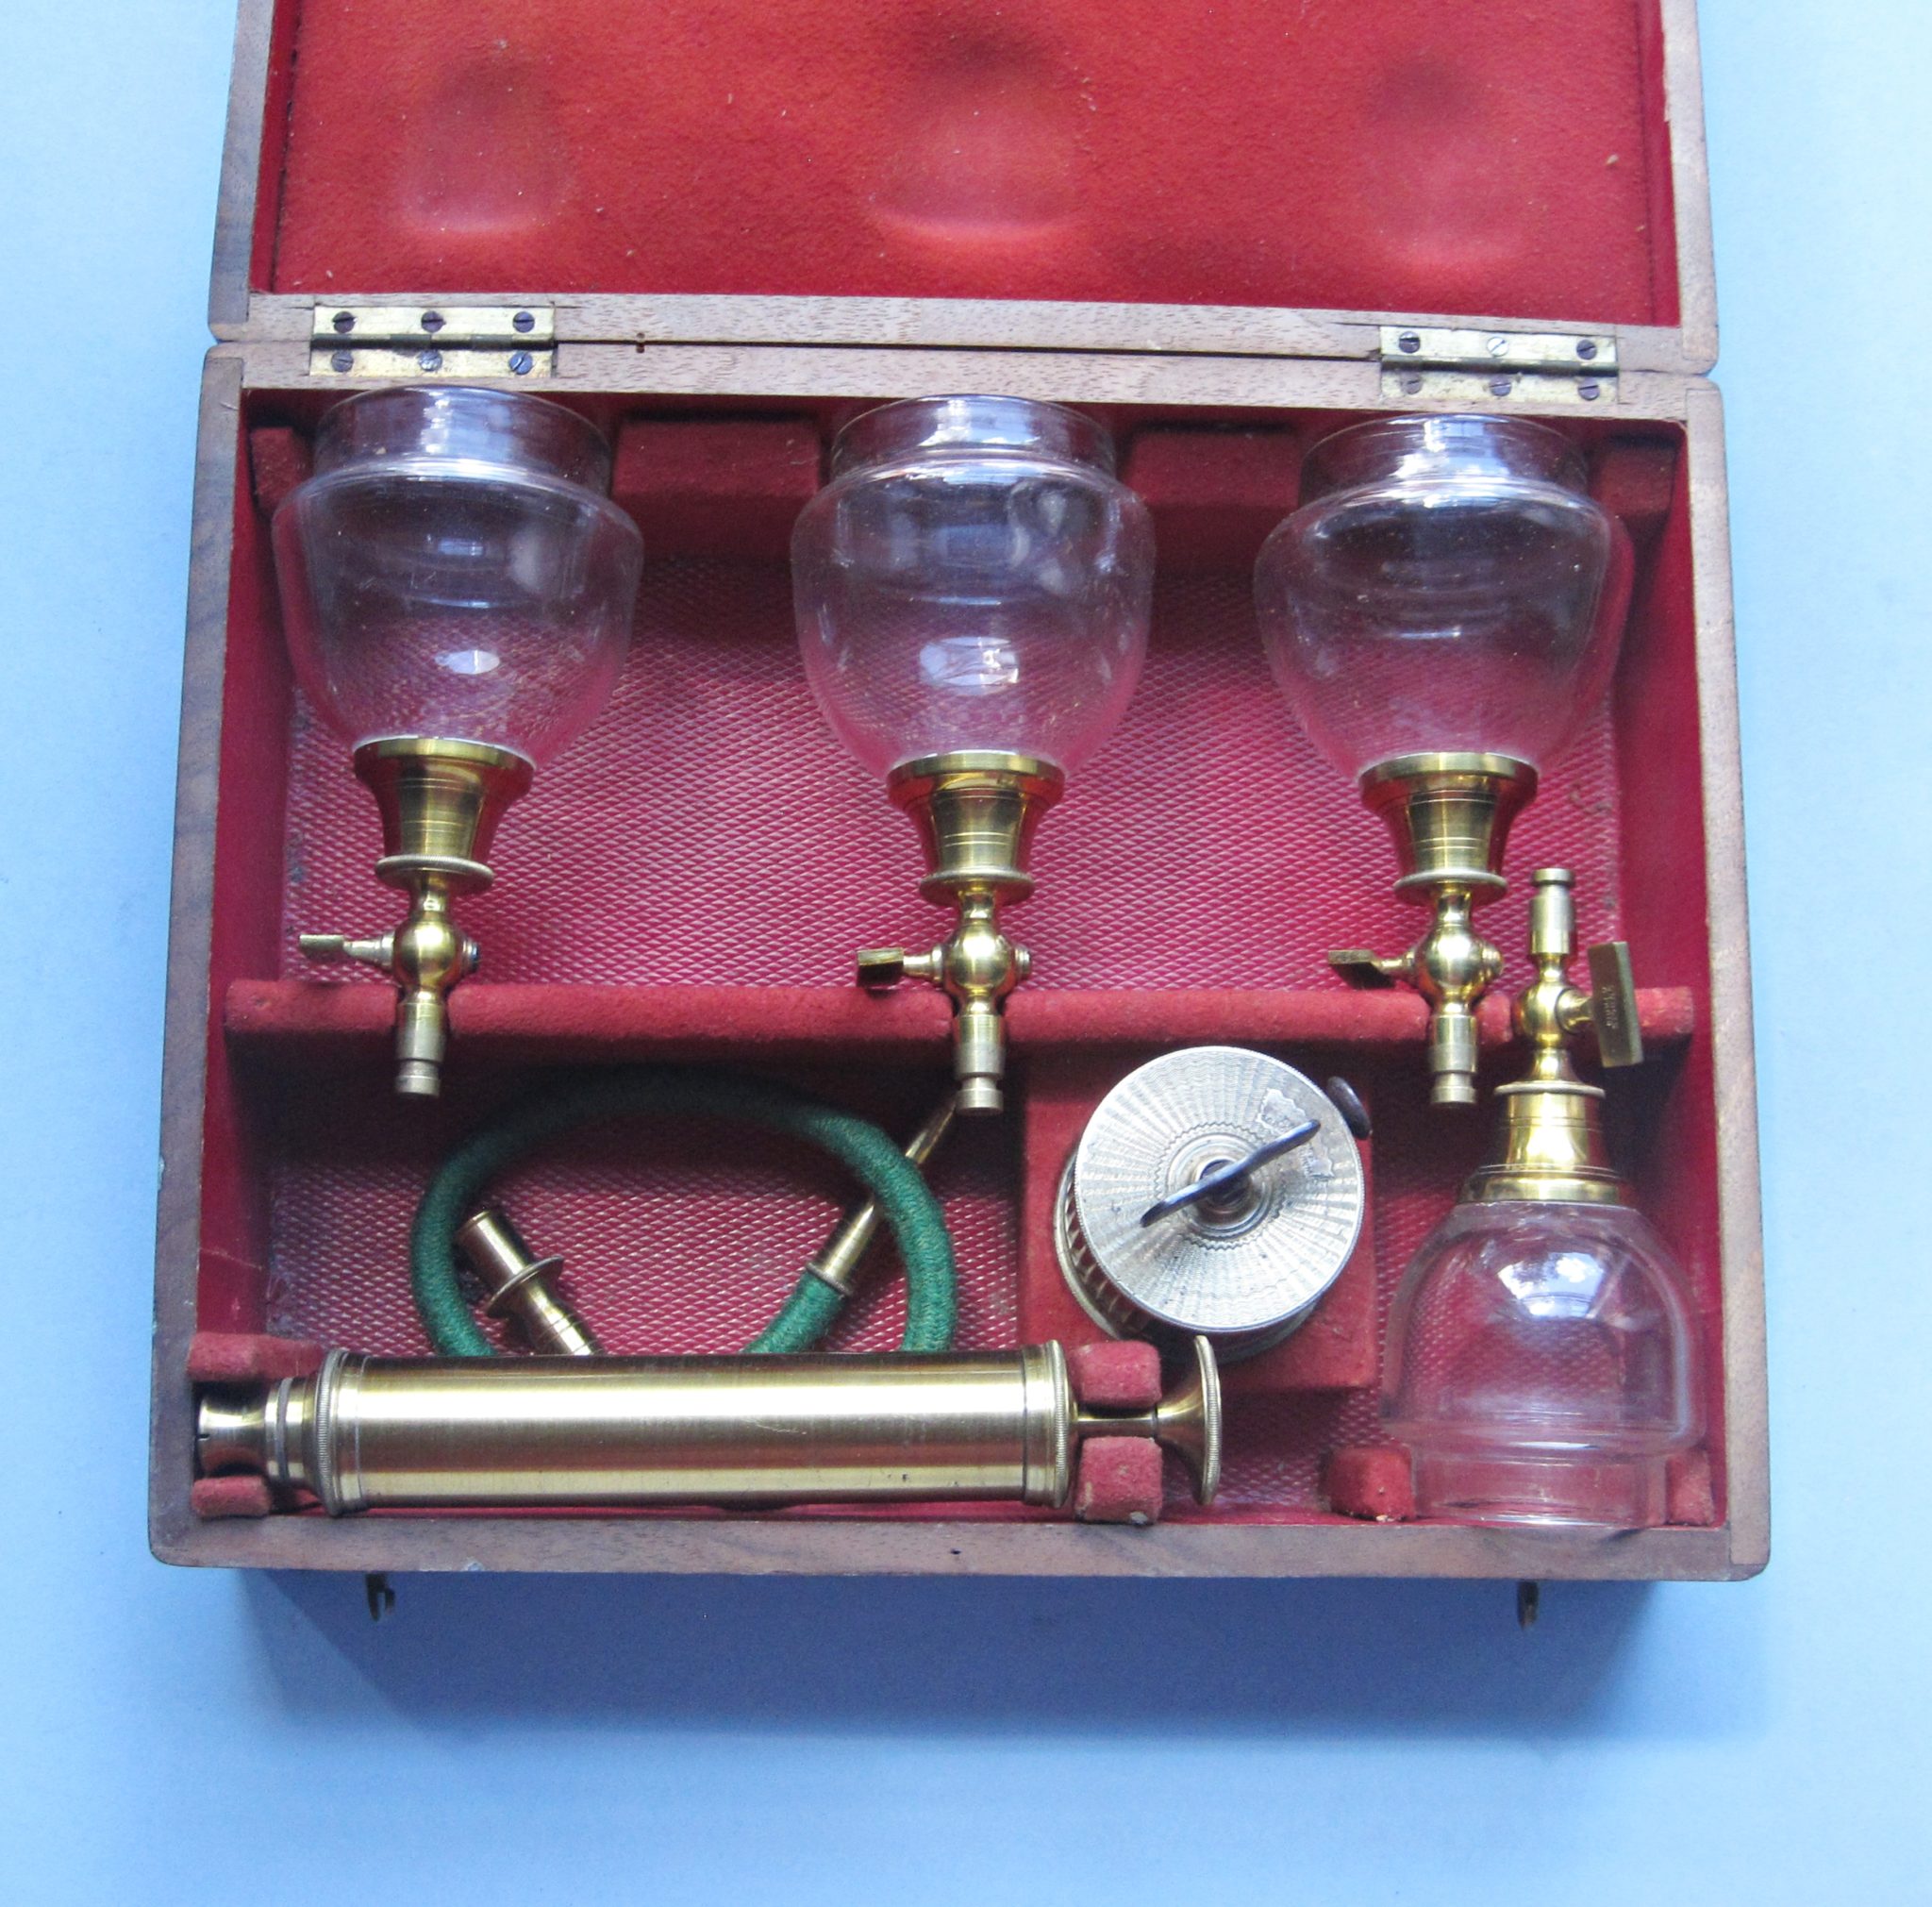 A Fine Mid-19th C. French Wet-Cupping Set by Dubois